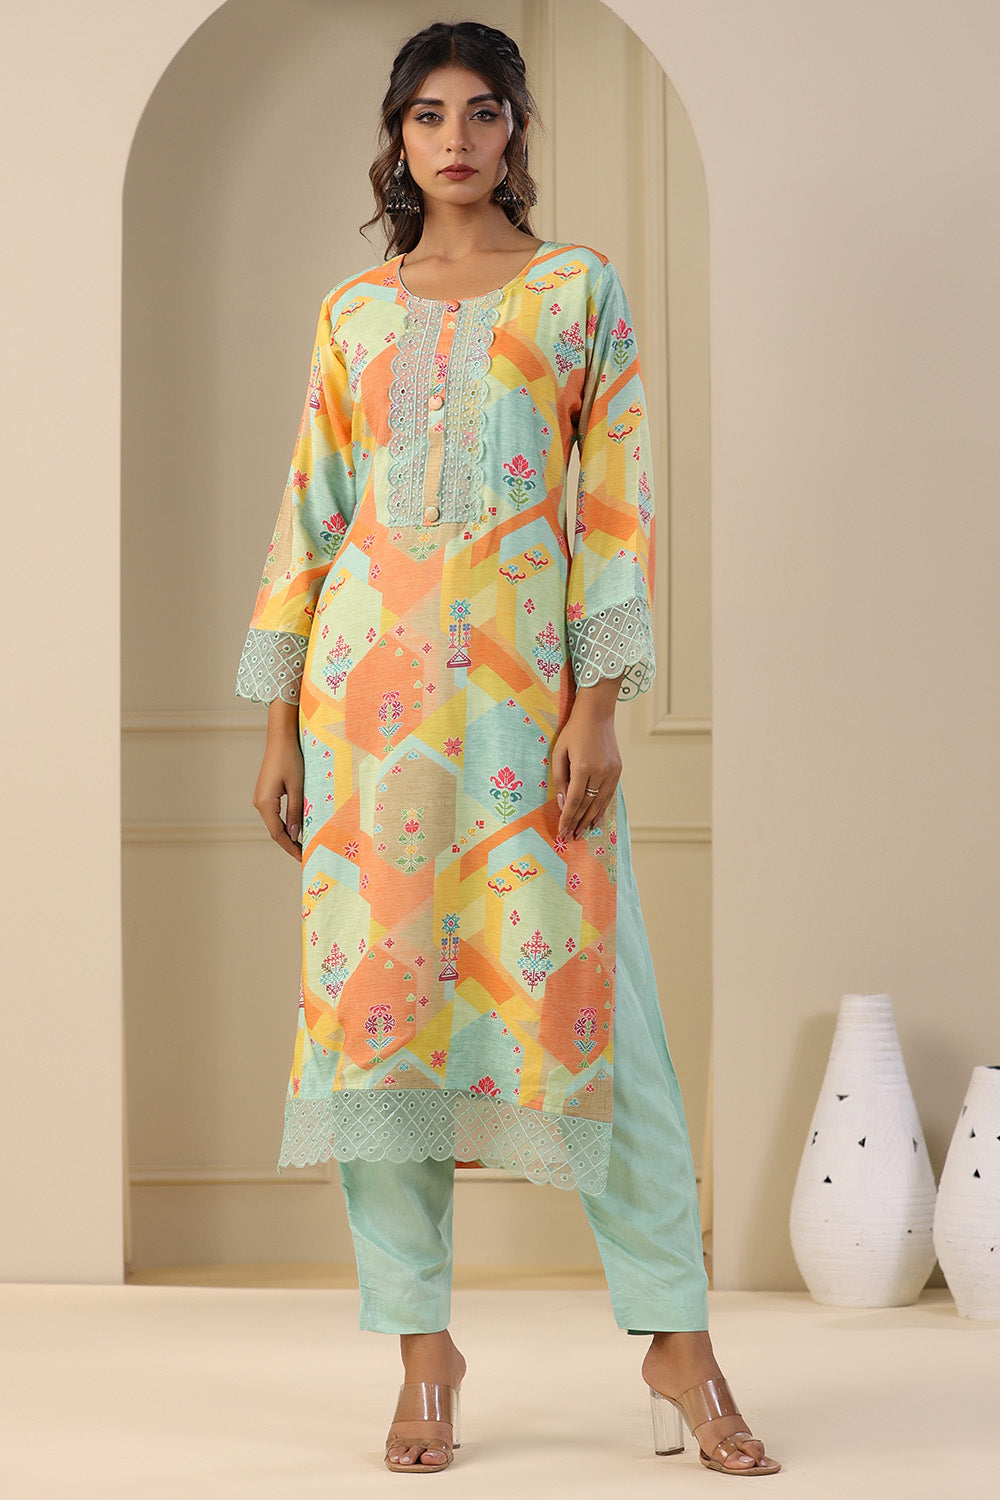 Sea Green Colour Muslin Printed Suit